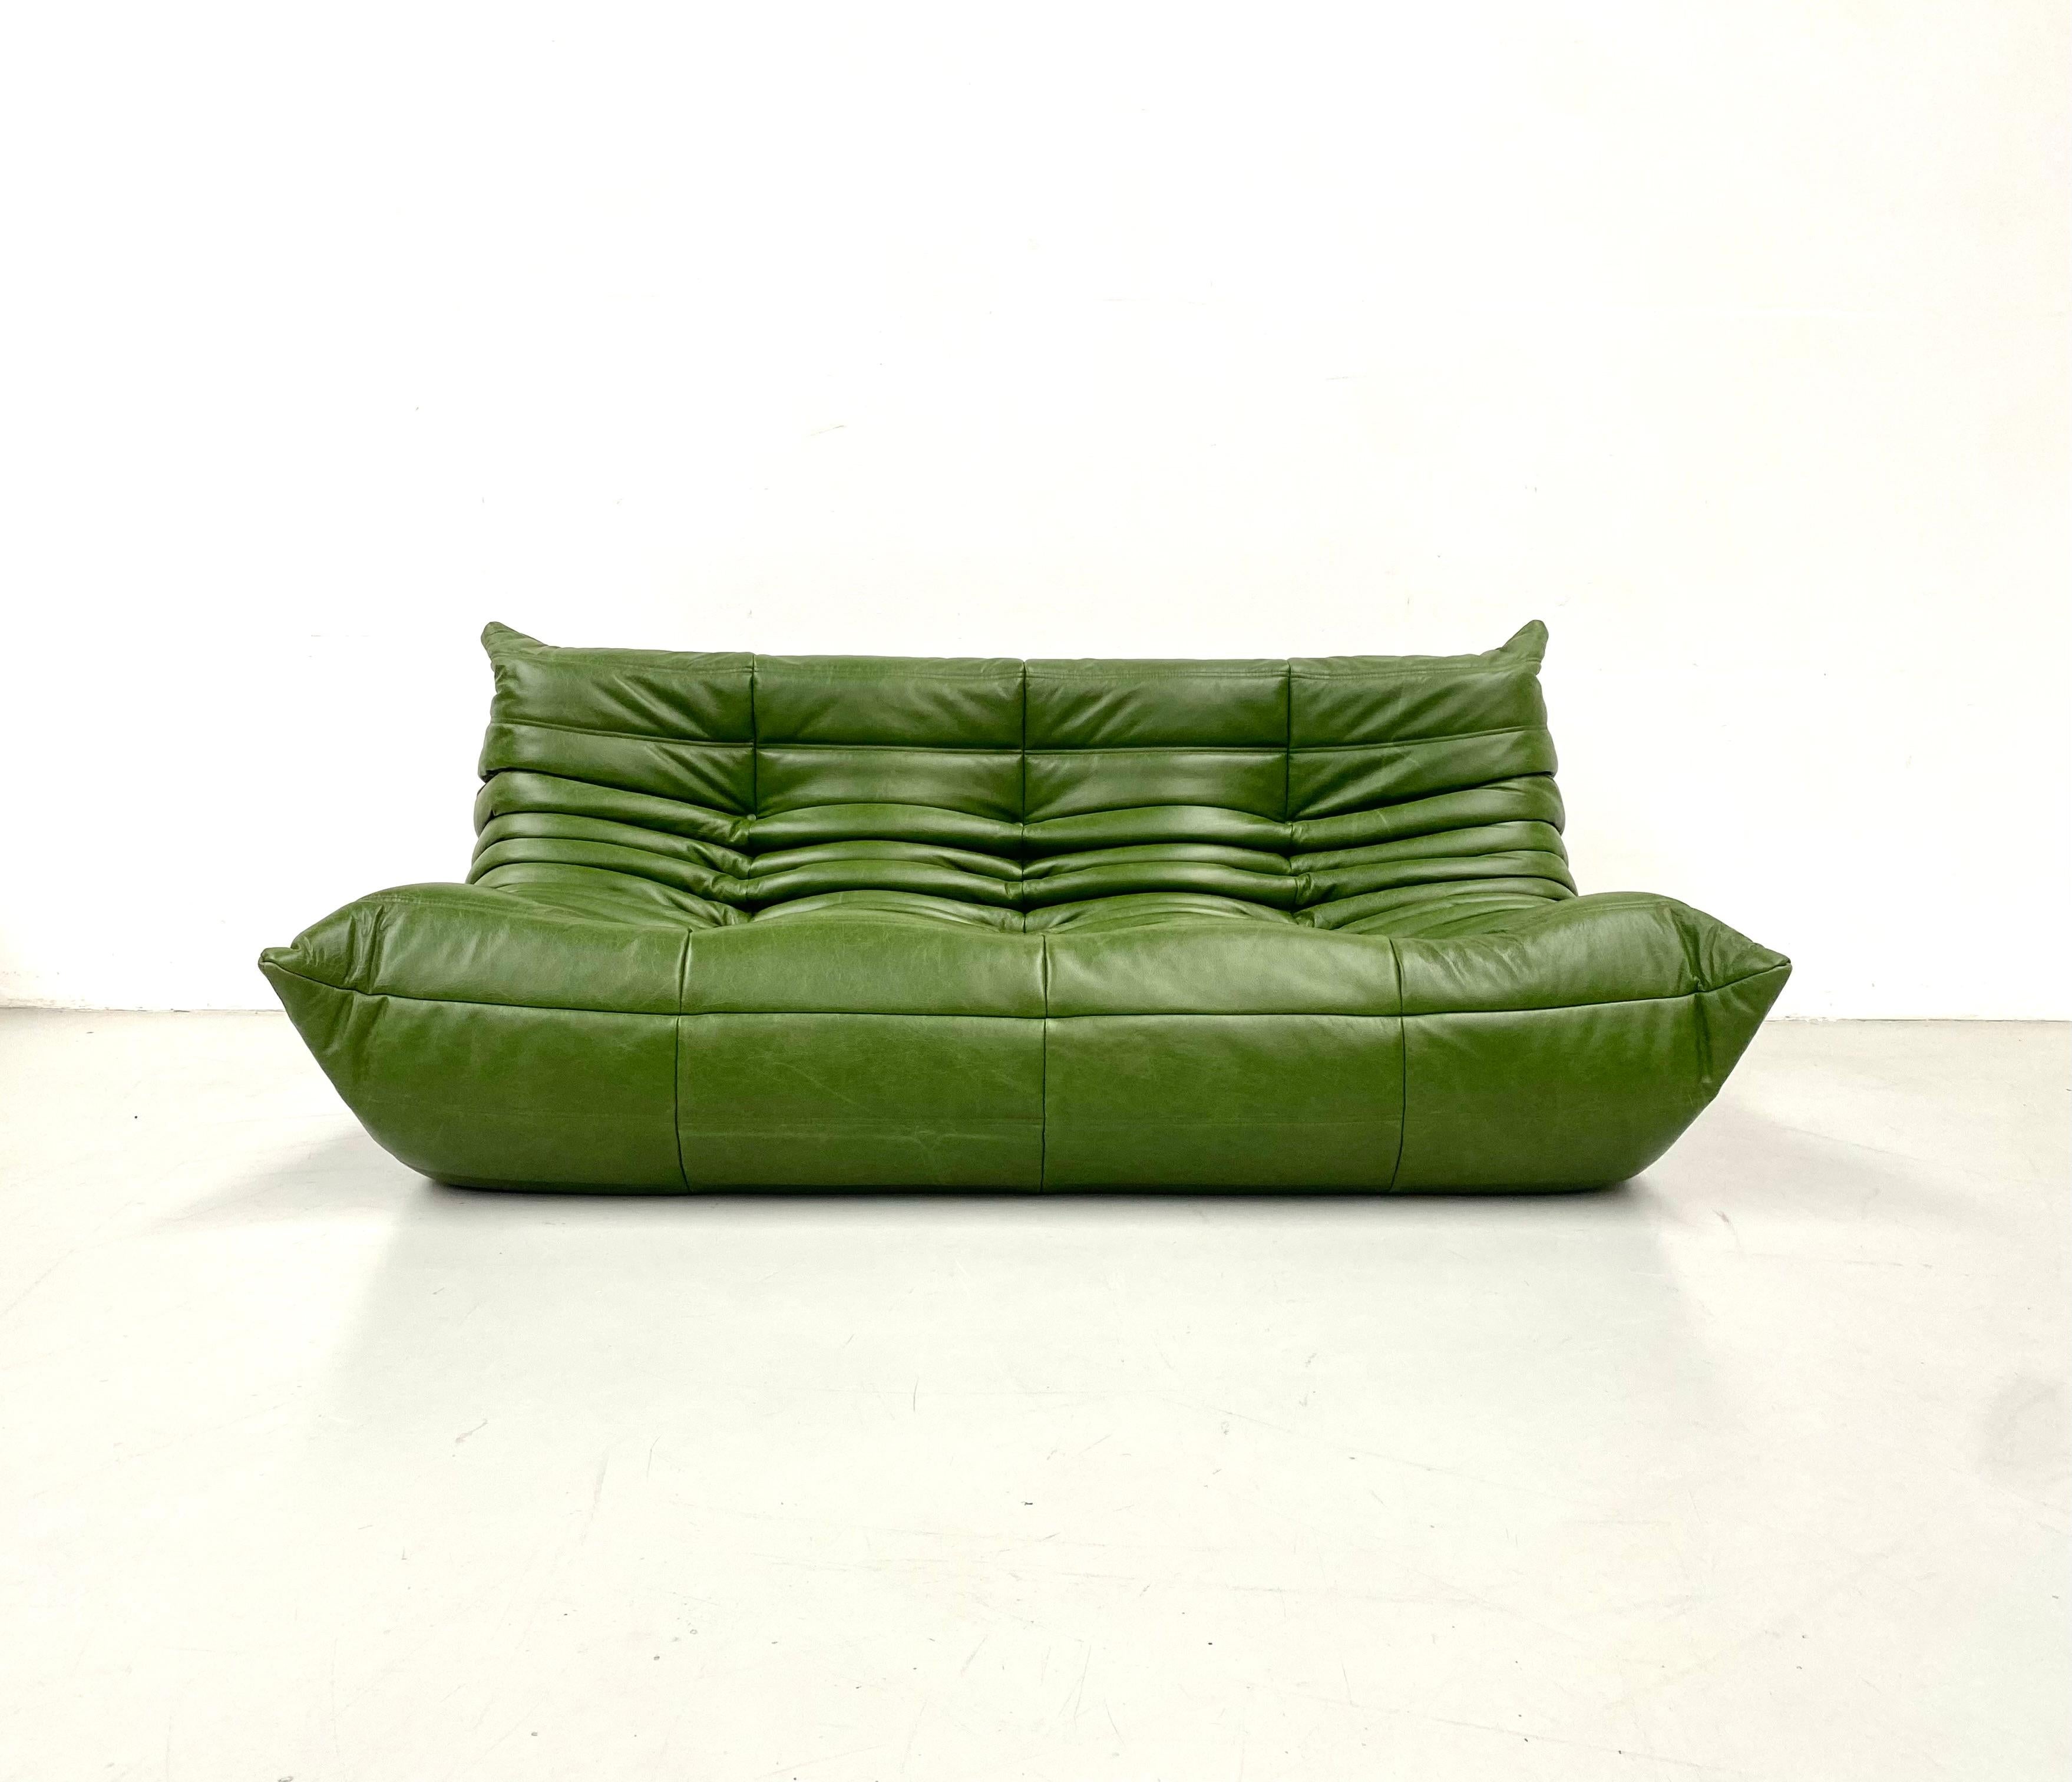 Michel Ducaroy designed the Togo in 1973 for Ligne Roset. This design is over 40 years old but still is until today very popular. The Togo is also the first piece of furniture that's made totally of foam.